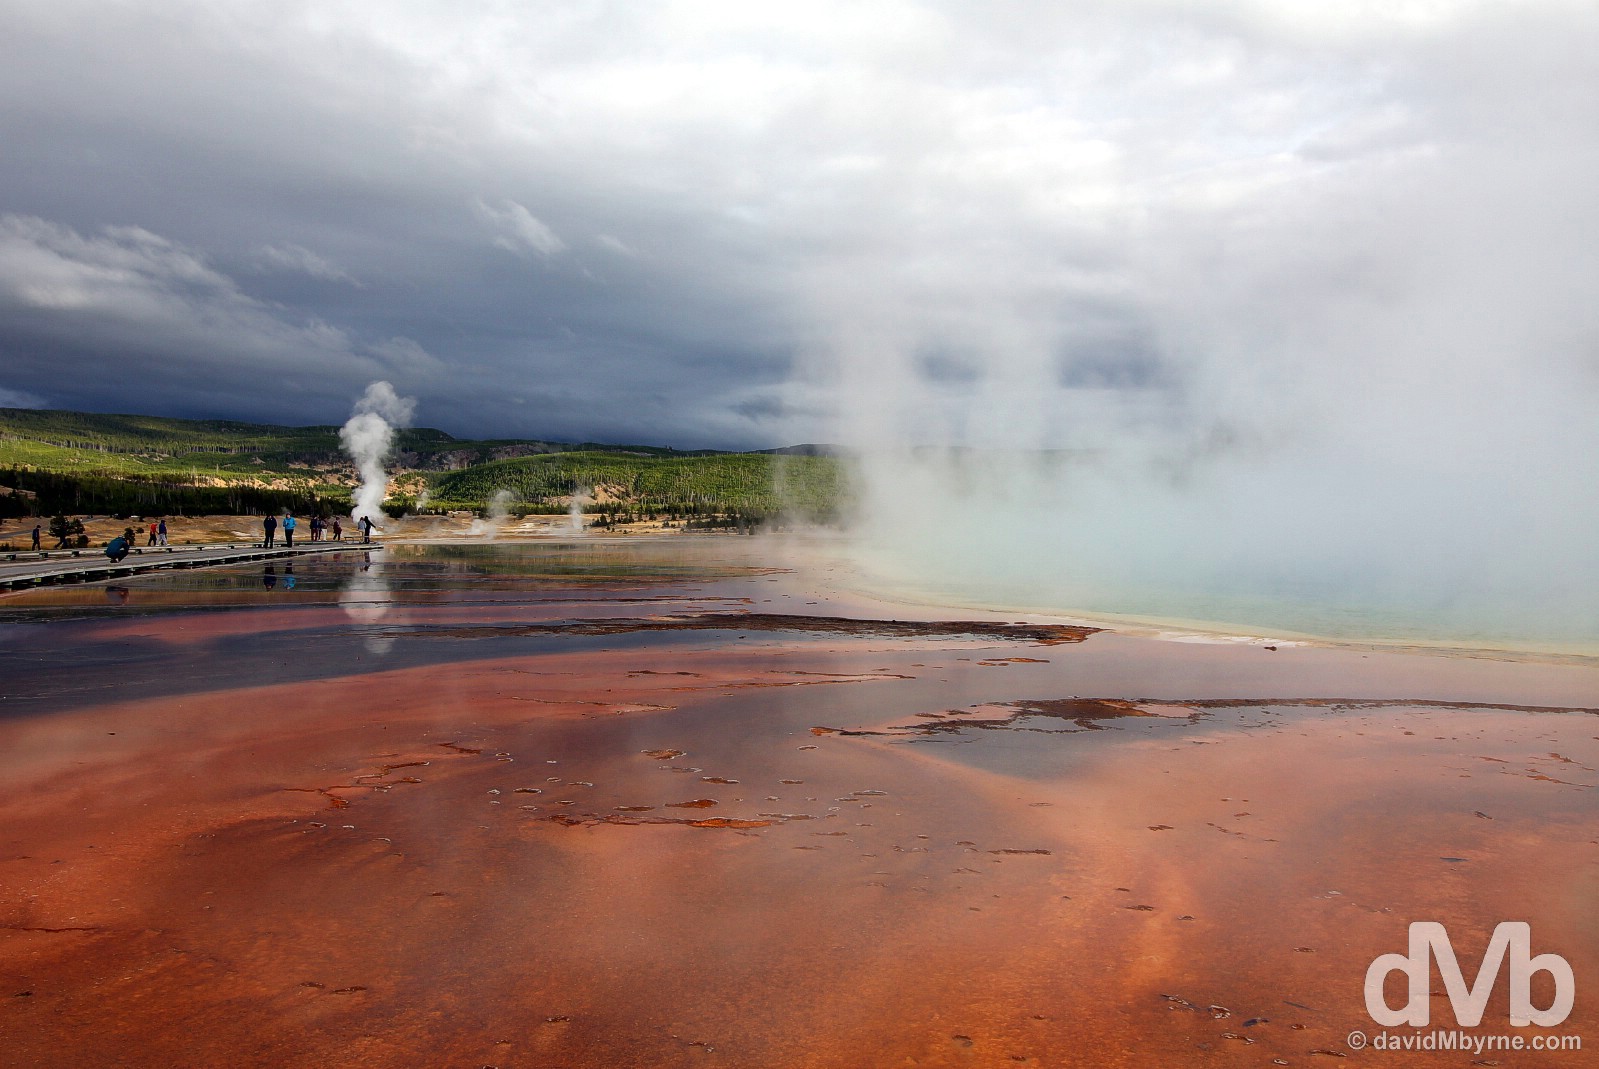 Grand Prismatic Spring, Midway Geyser Basin, Yellowstone National Park, Wyoming, USA. September 4, 2016.